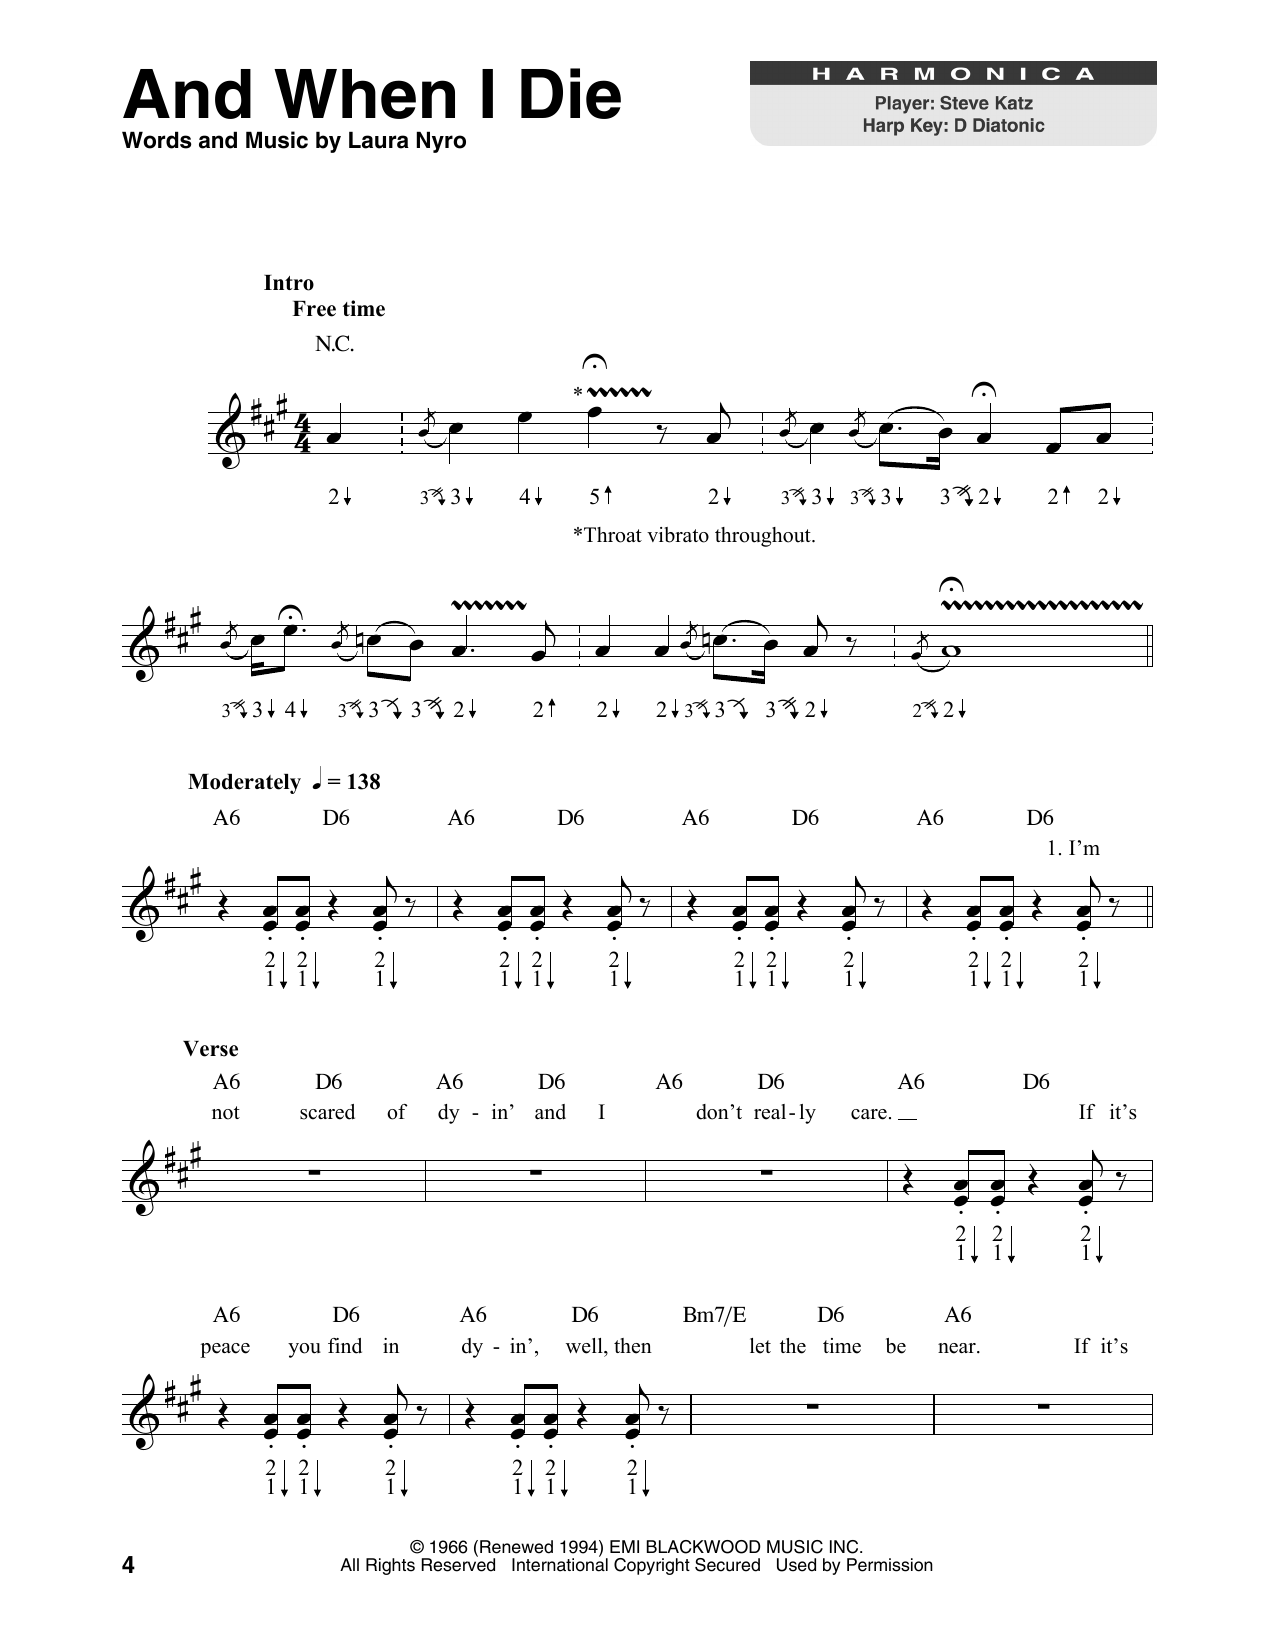 Blood, Sweat & Tears And When I Die sheet music notes printable PDF score